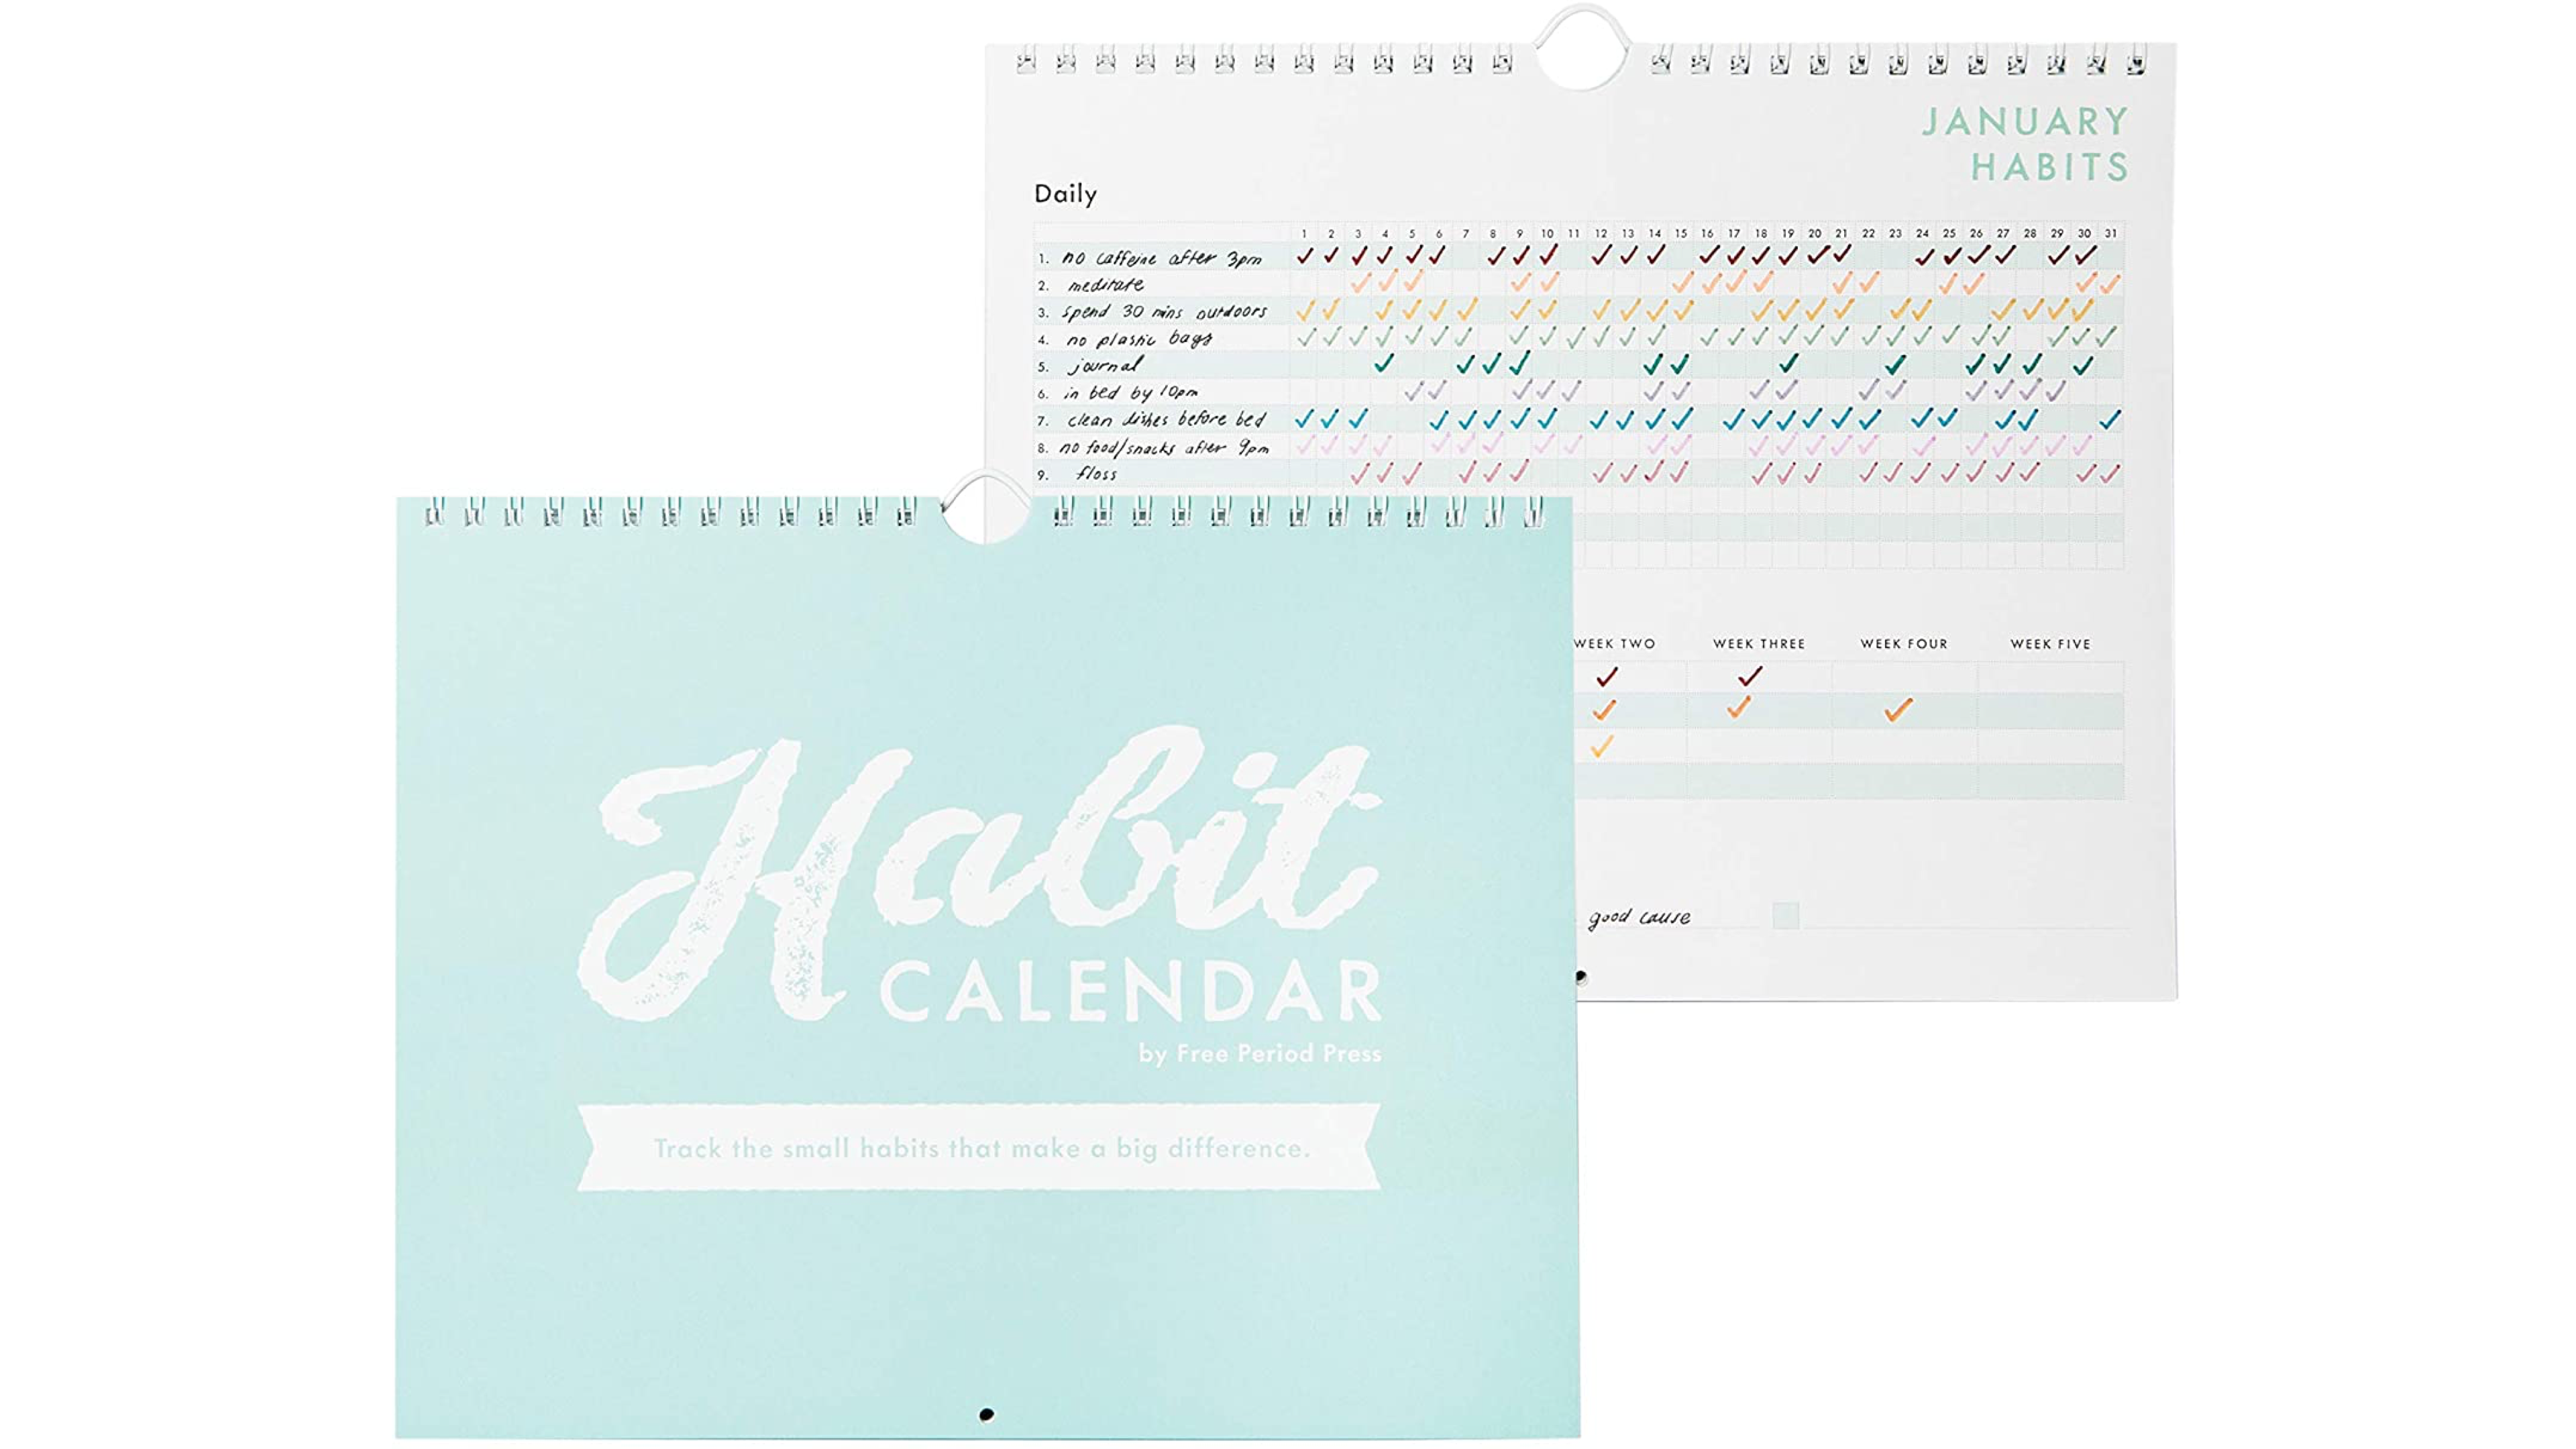 calendar that can help you track habits to build healthier ones, like using your phone less and drinking more water